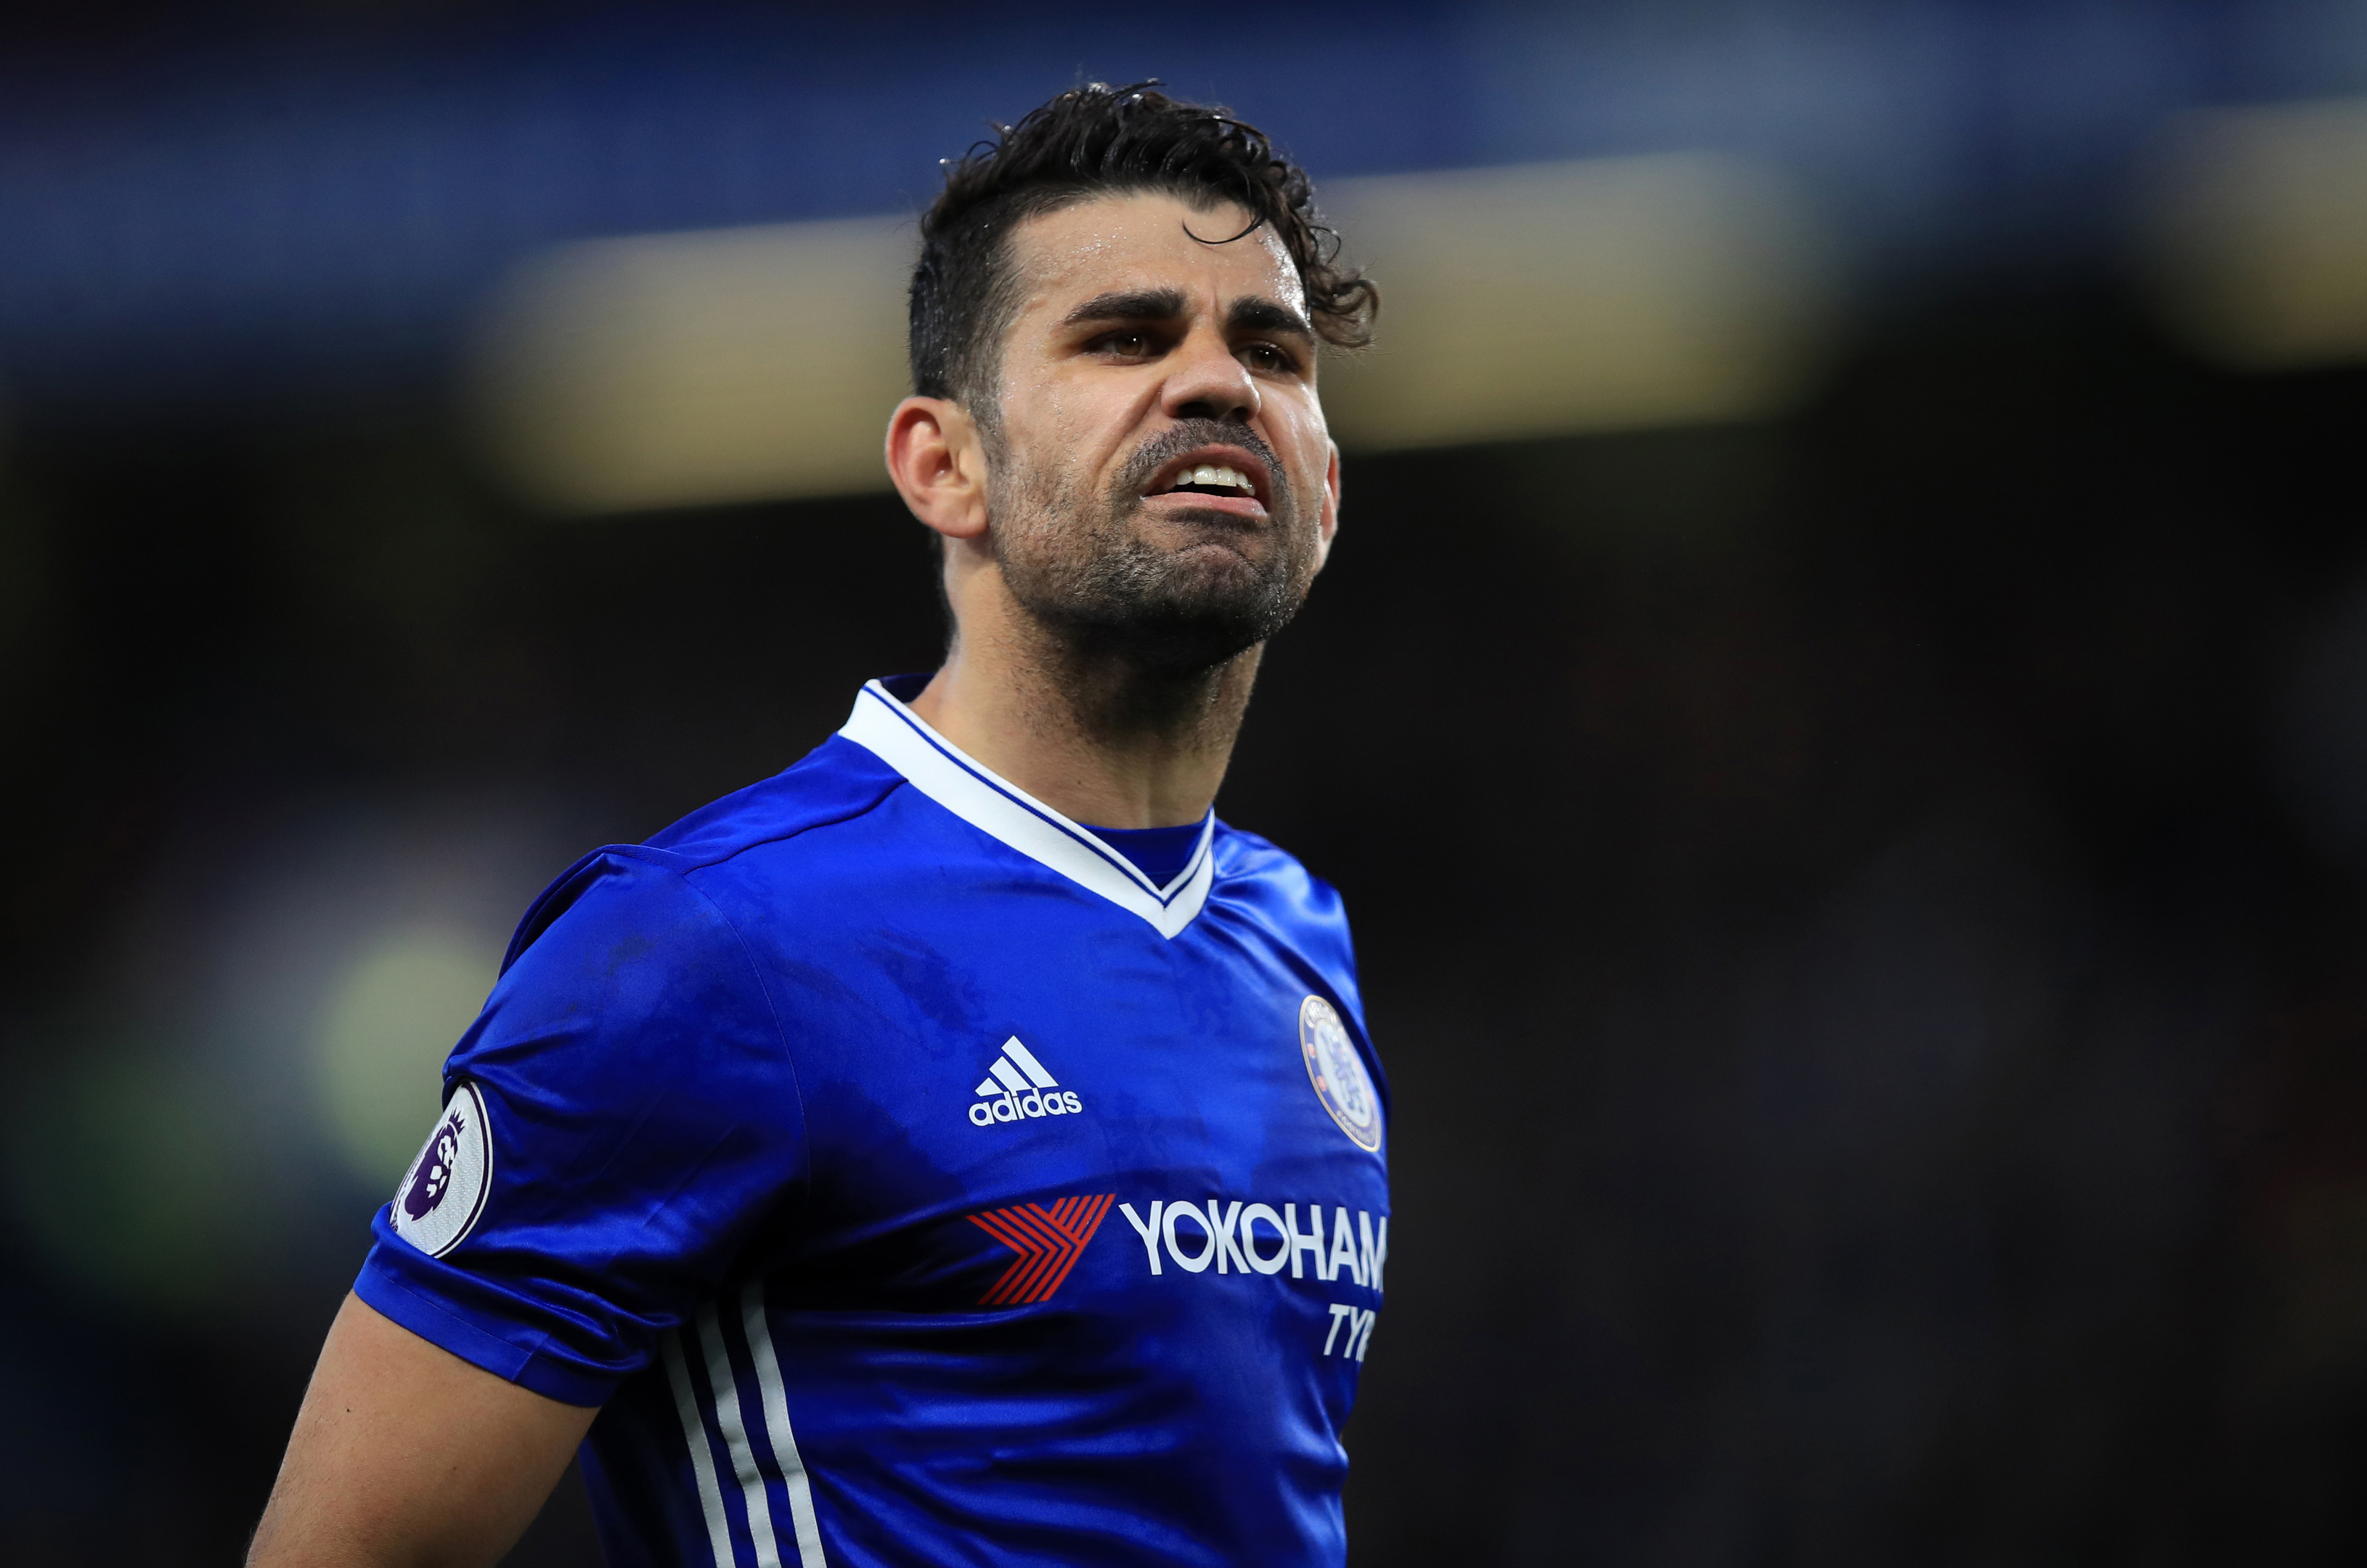 Diego Costa took the huff at Chelsea in the summer.